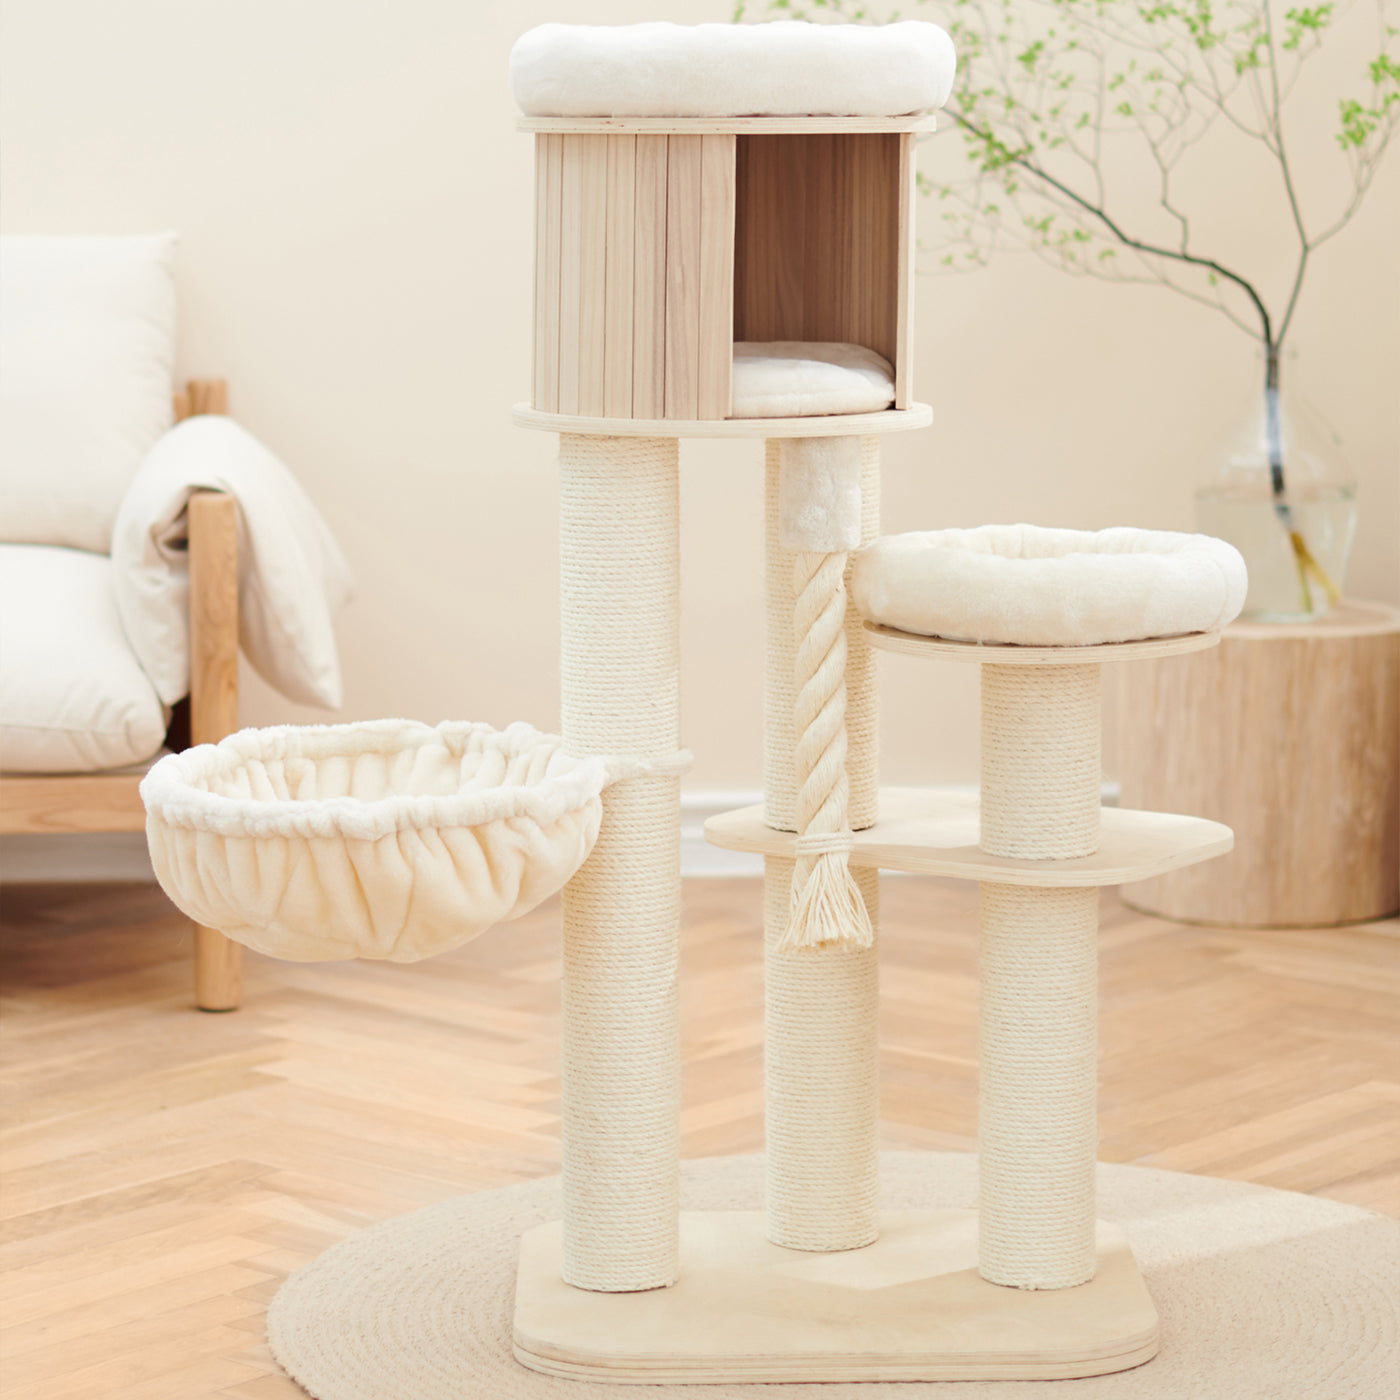 Discover our Luxury Helsinki The Loft Cat Tree. Present your cat with the perfect hideout! Crafted using durable and long-lasting wood that features multiple scratch posts for cats, hanging rope for playtime, a cosy hammock for snuggling into with multiple platforms and a den for pet burrow! Available now at Lords & Labradors